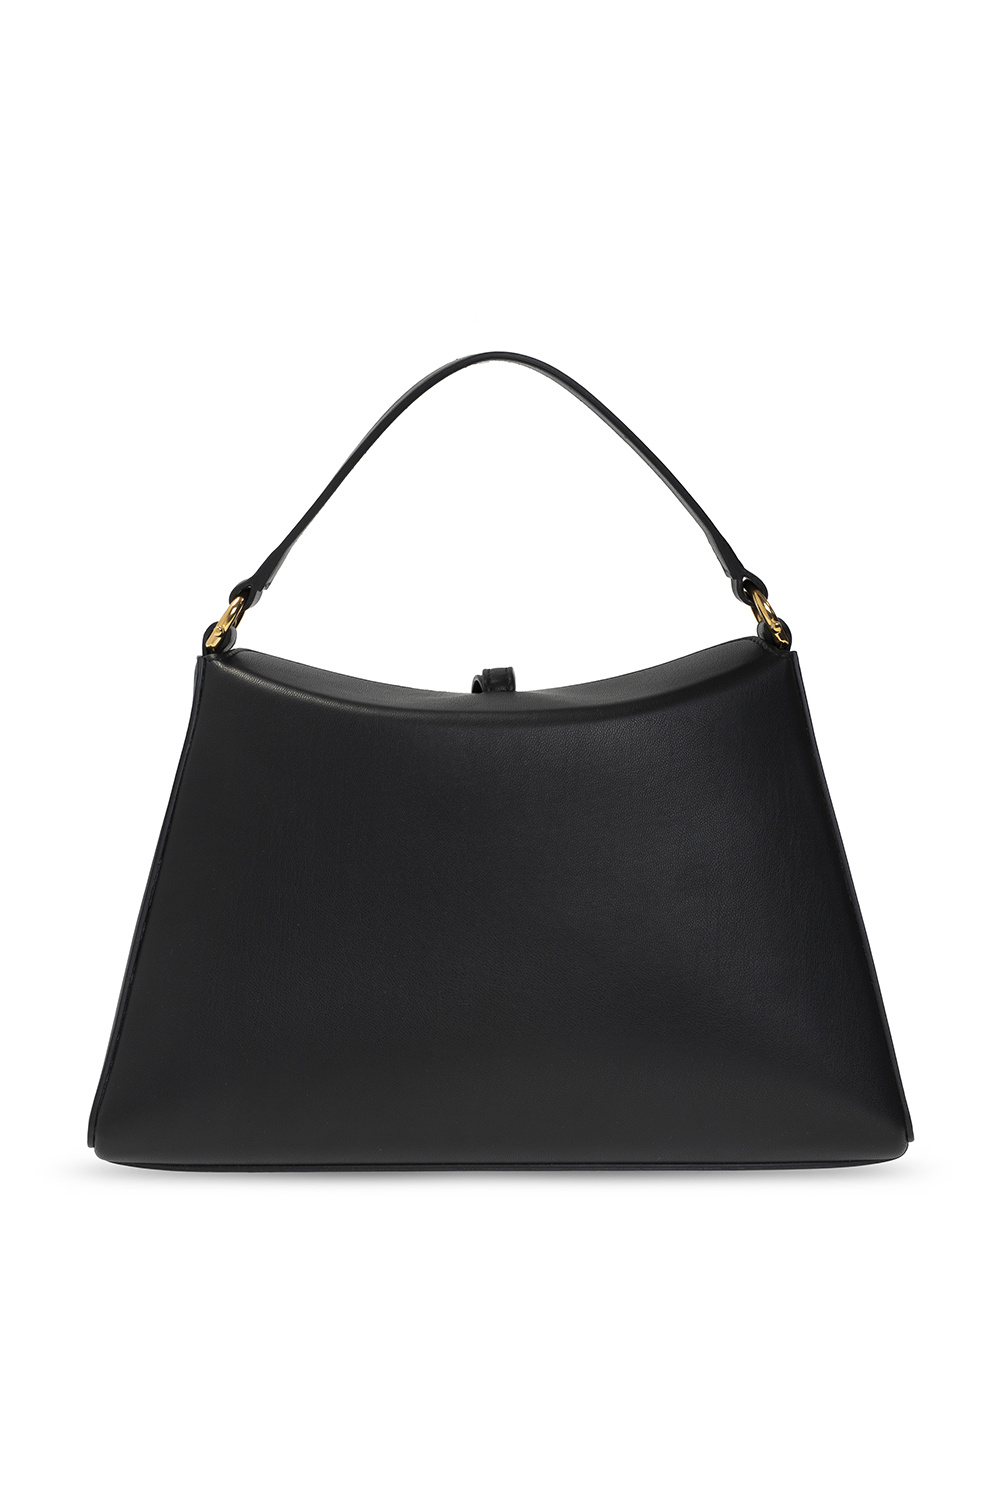 Celine Romy - thoughts? Keep or exchange for black triomphe? : r/handbags